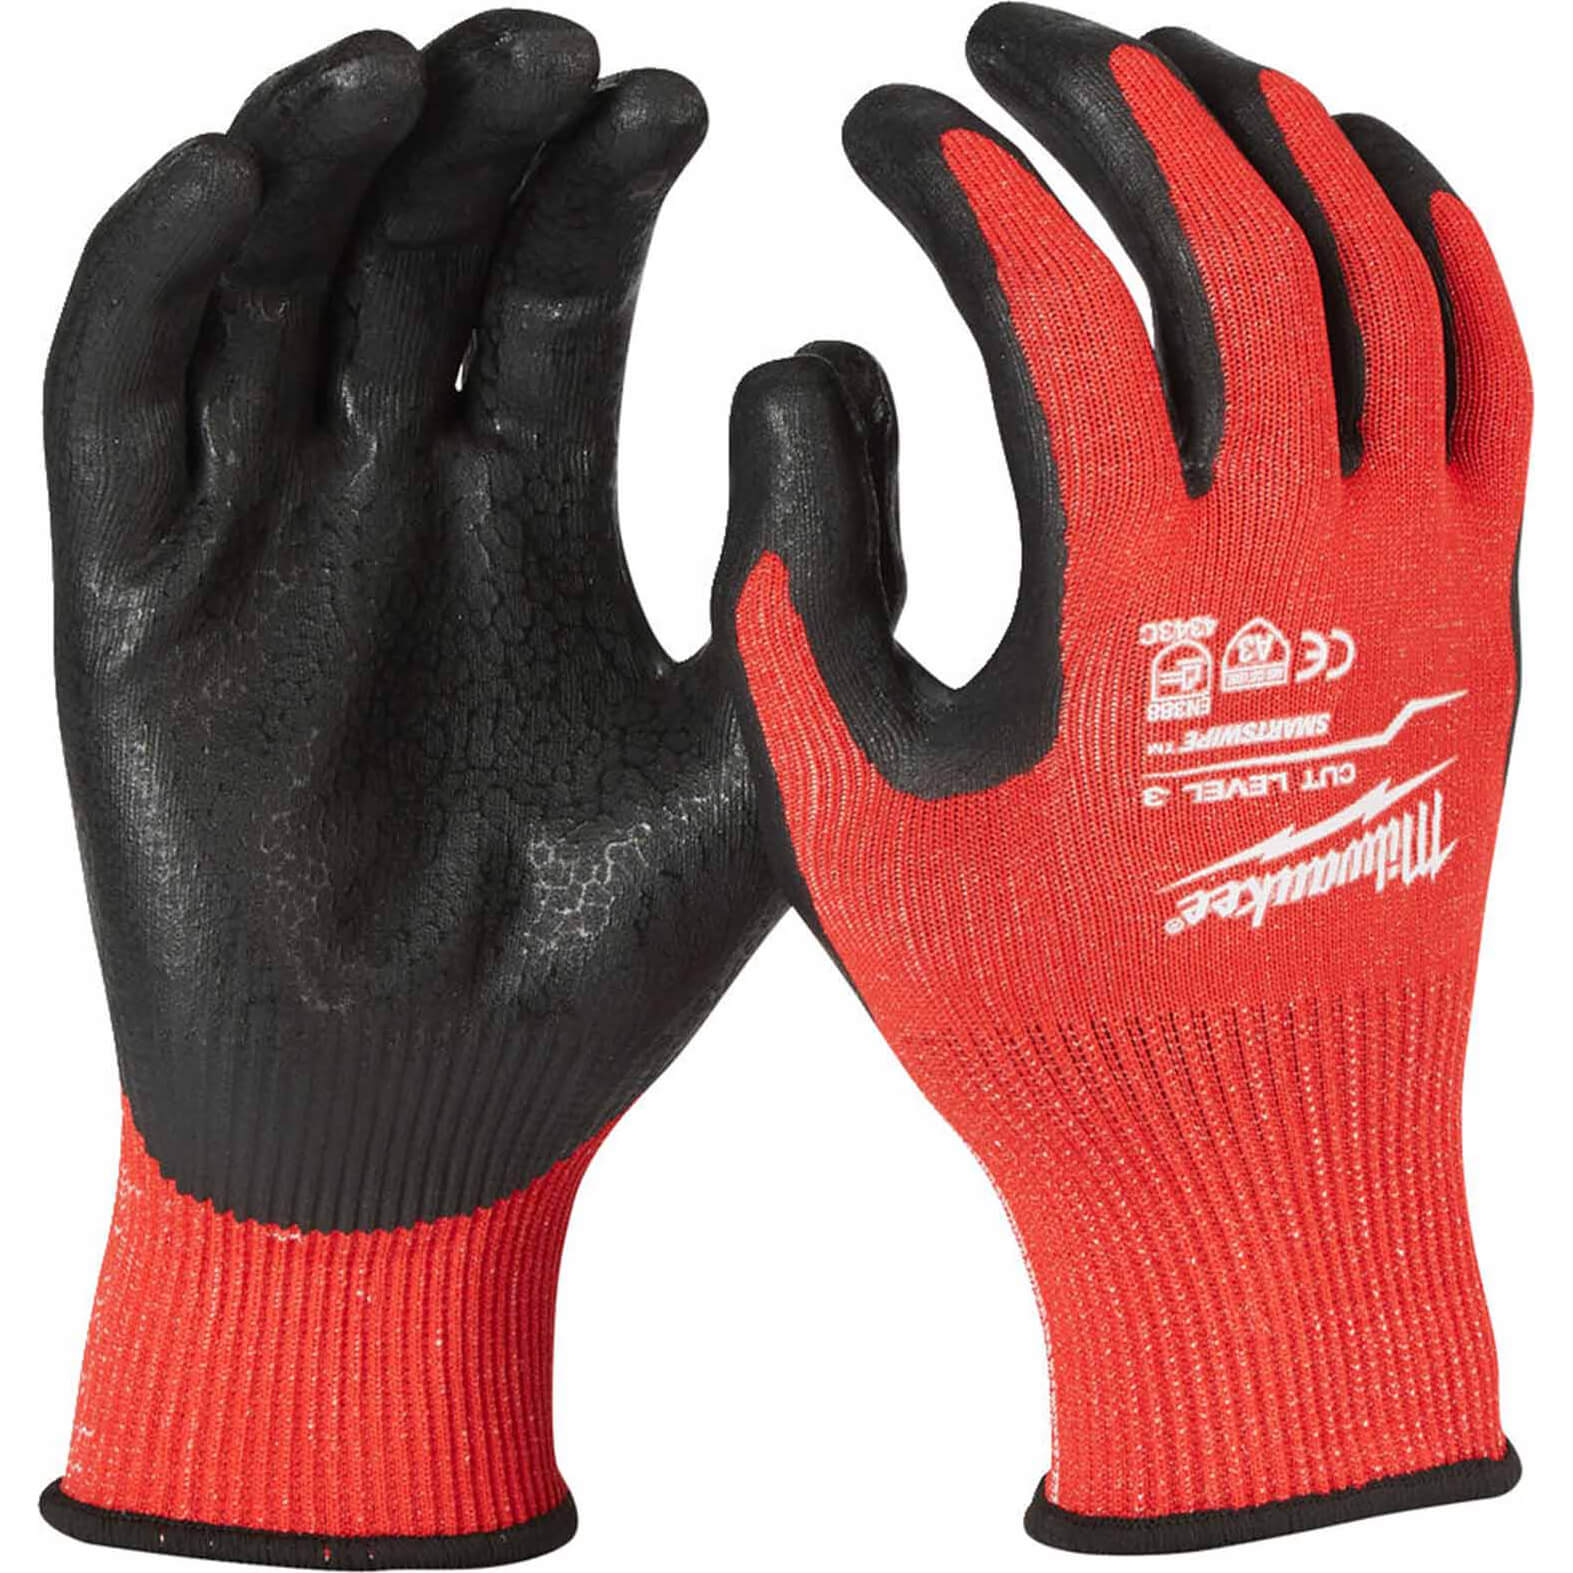 Image of Milwaukee Cut Level 3 Dipped Work Gloves Black / Red S Pack of 144